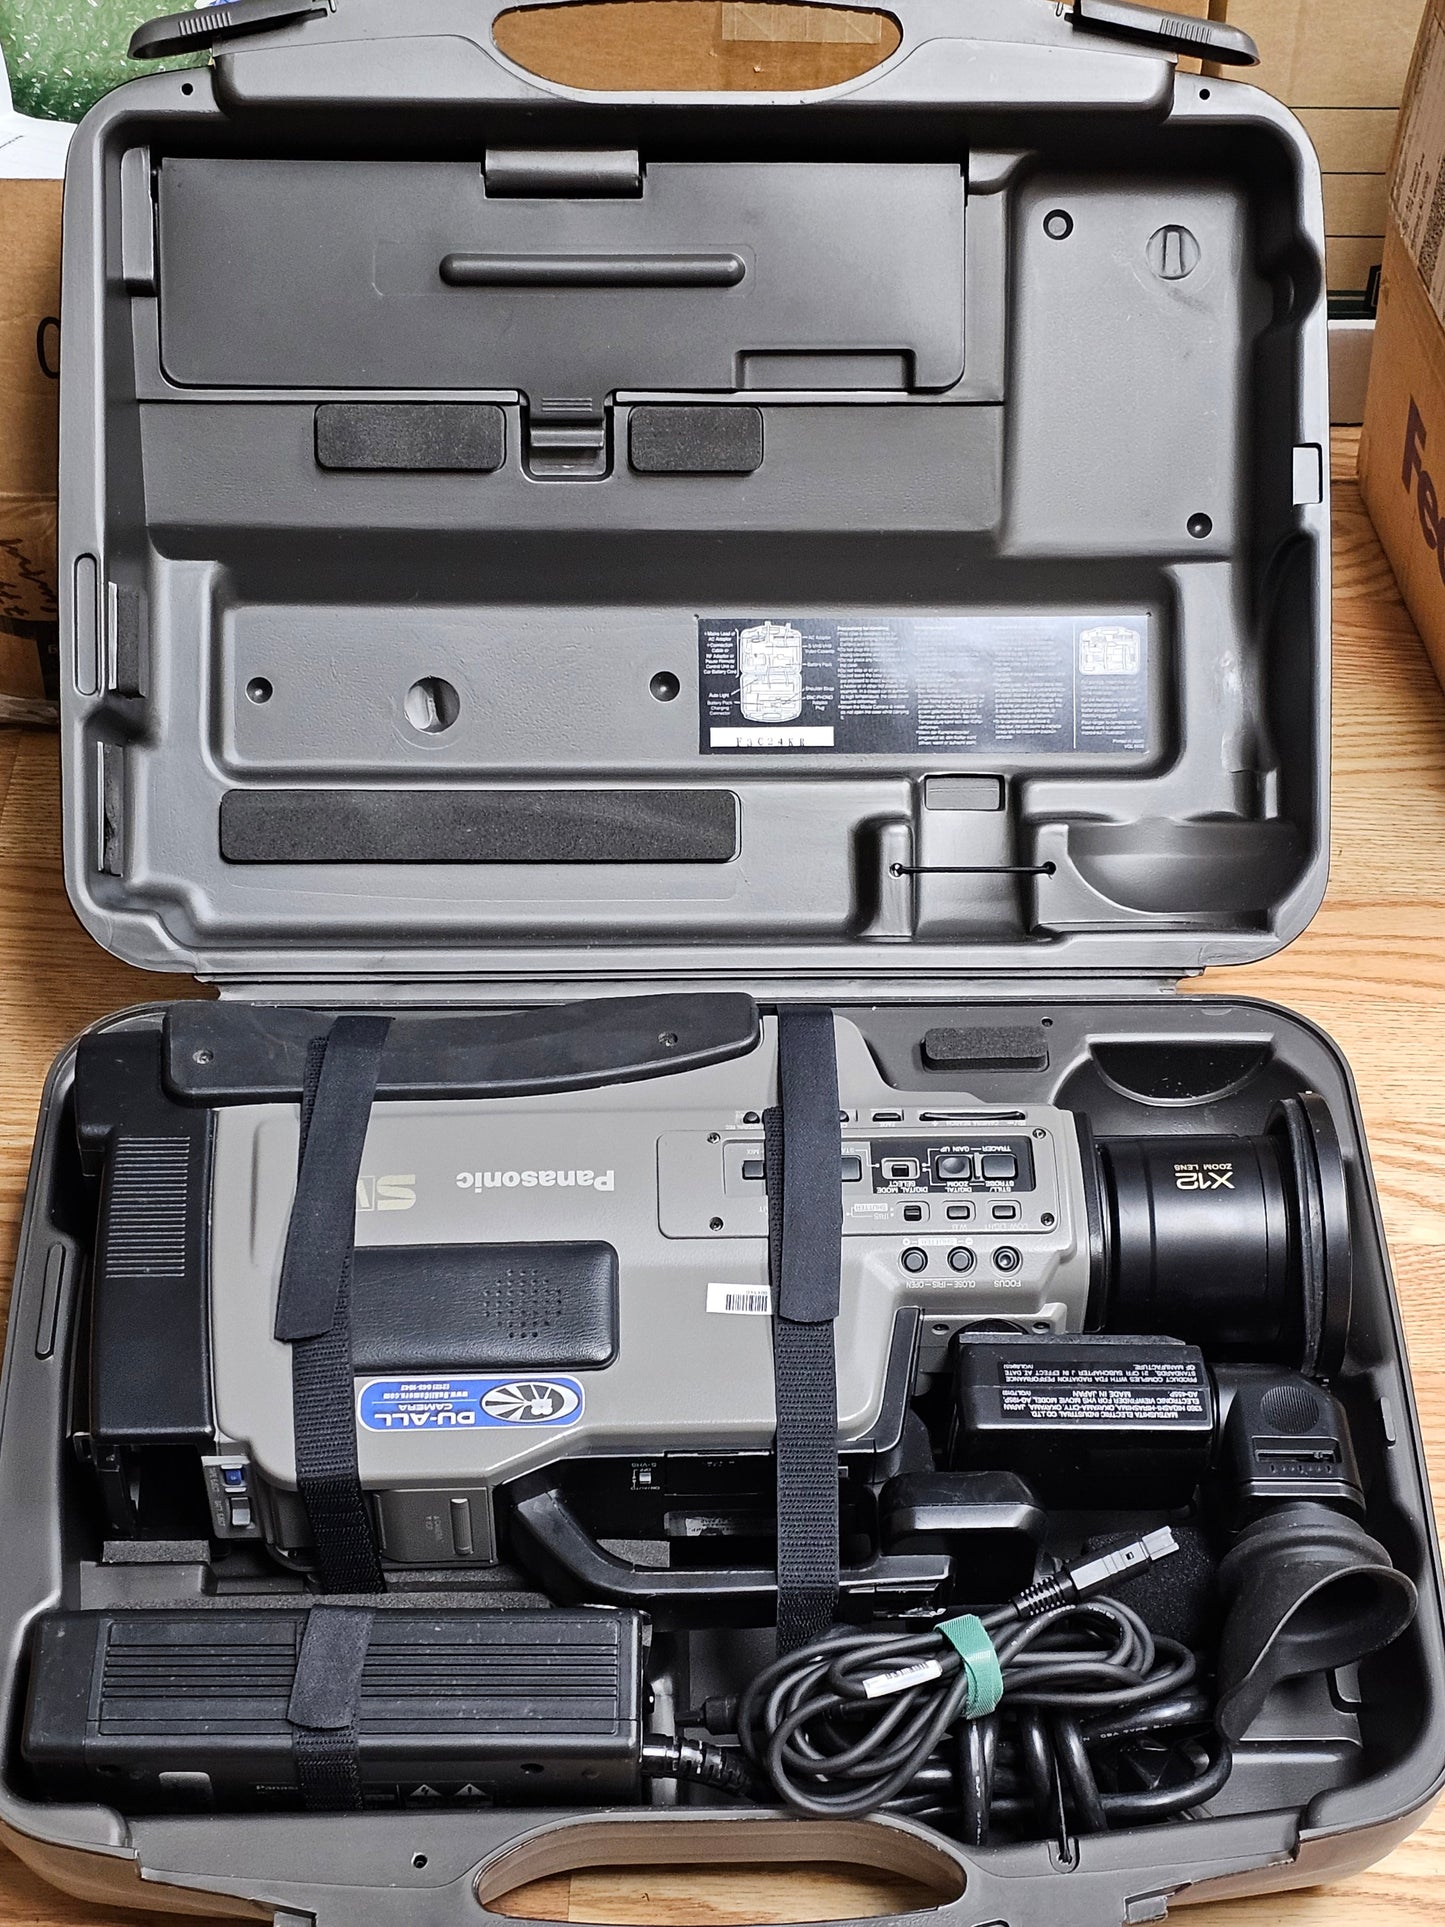 Panasonic AG-456UP Reporter S-VHS Analog Camcorder S# D9HB00205